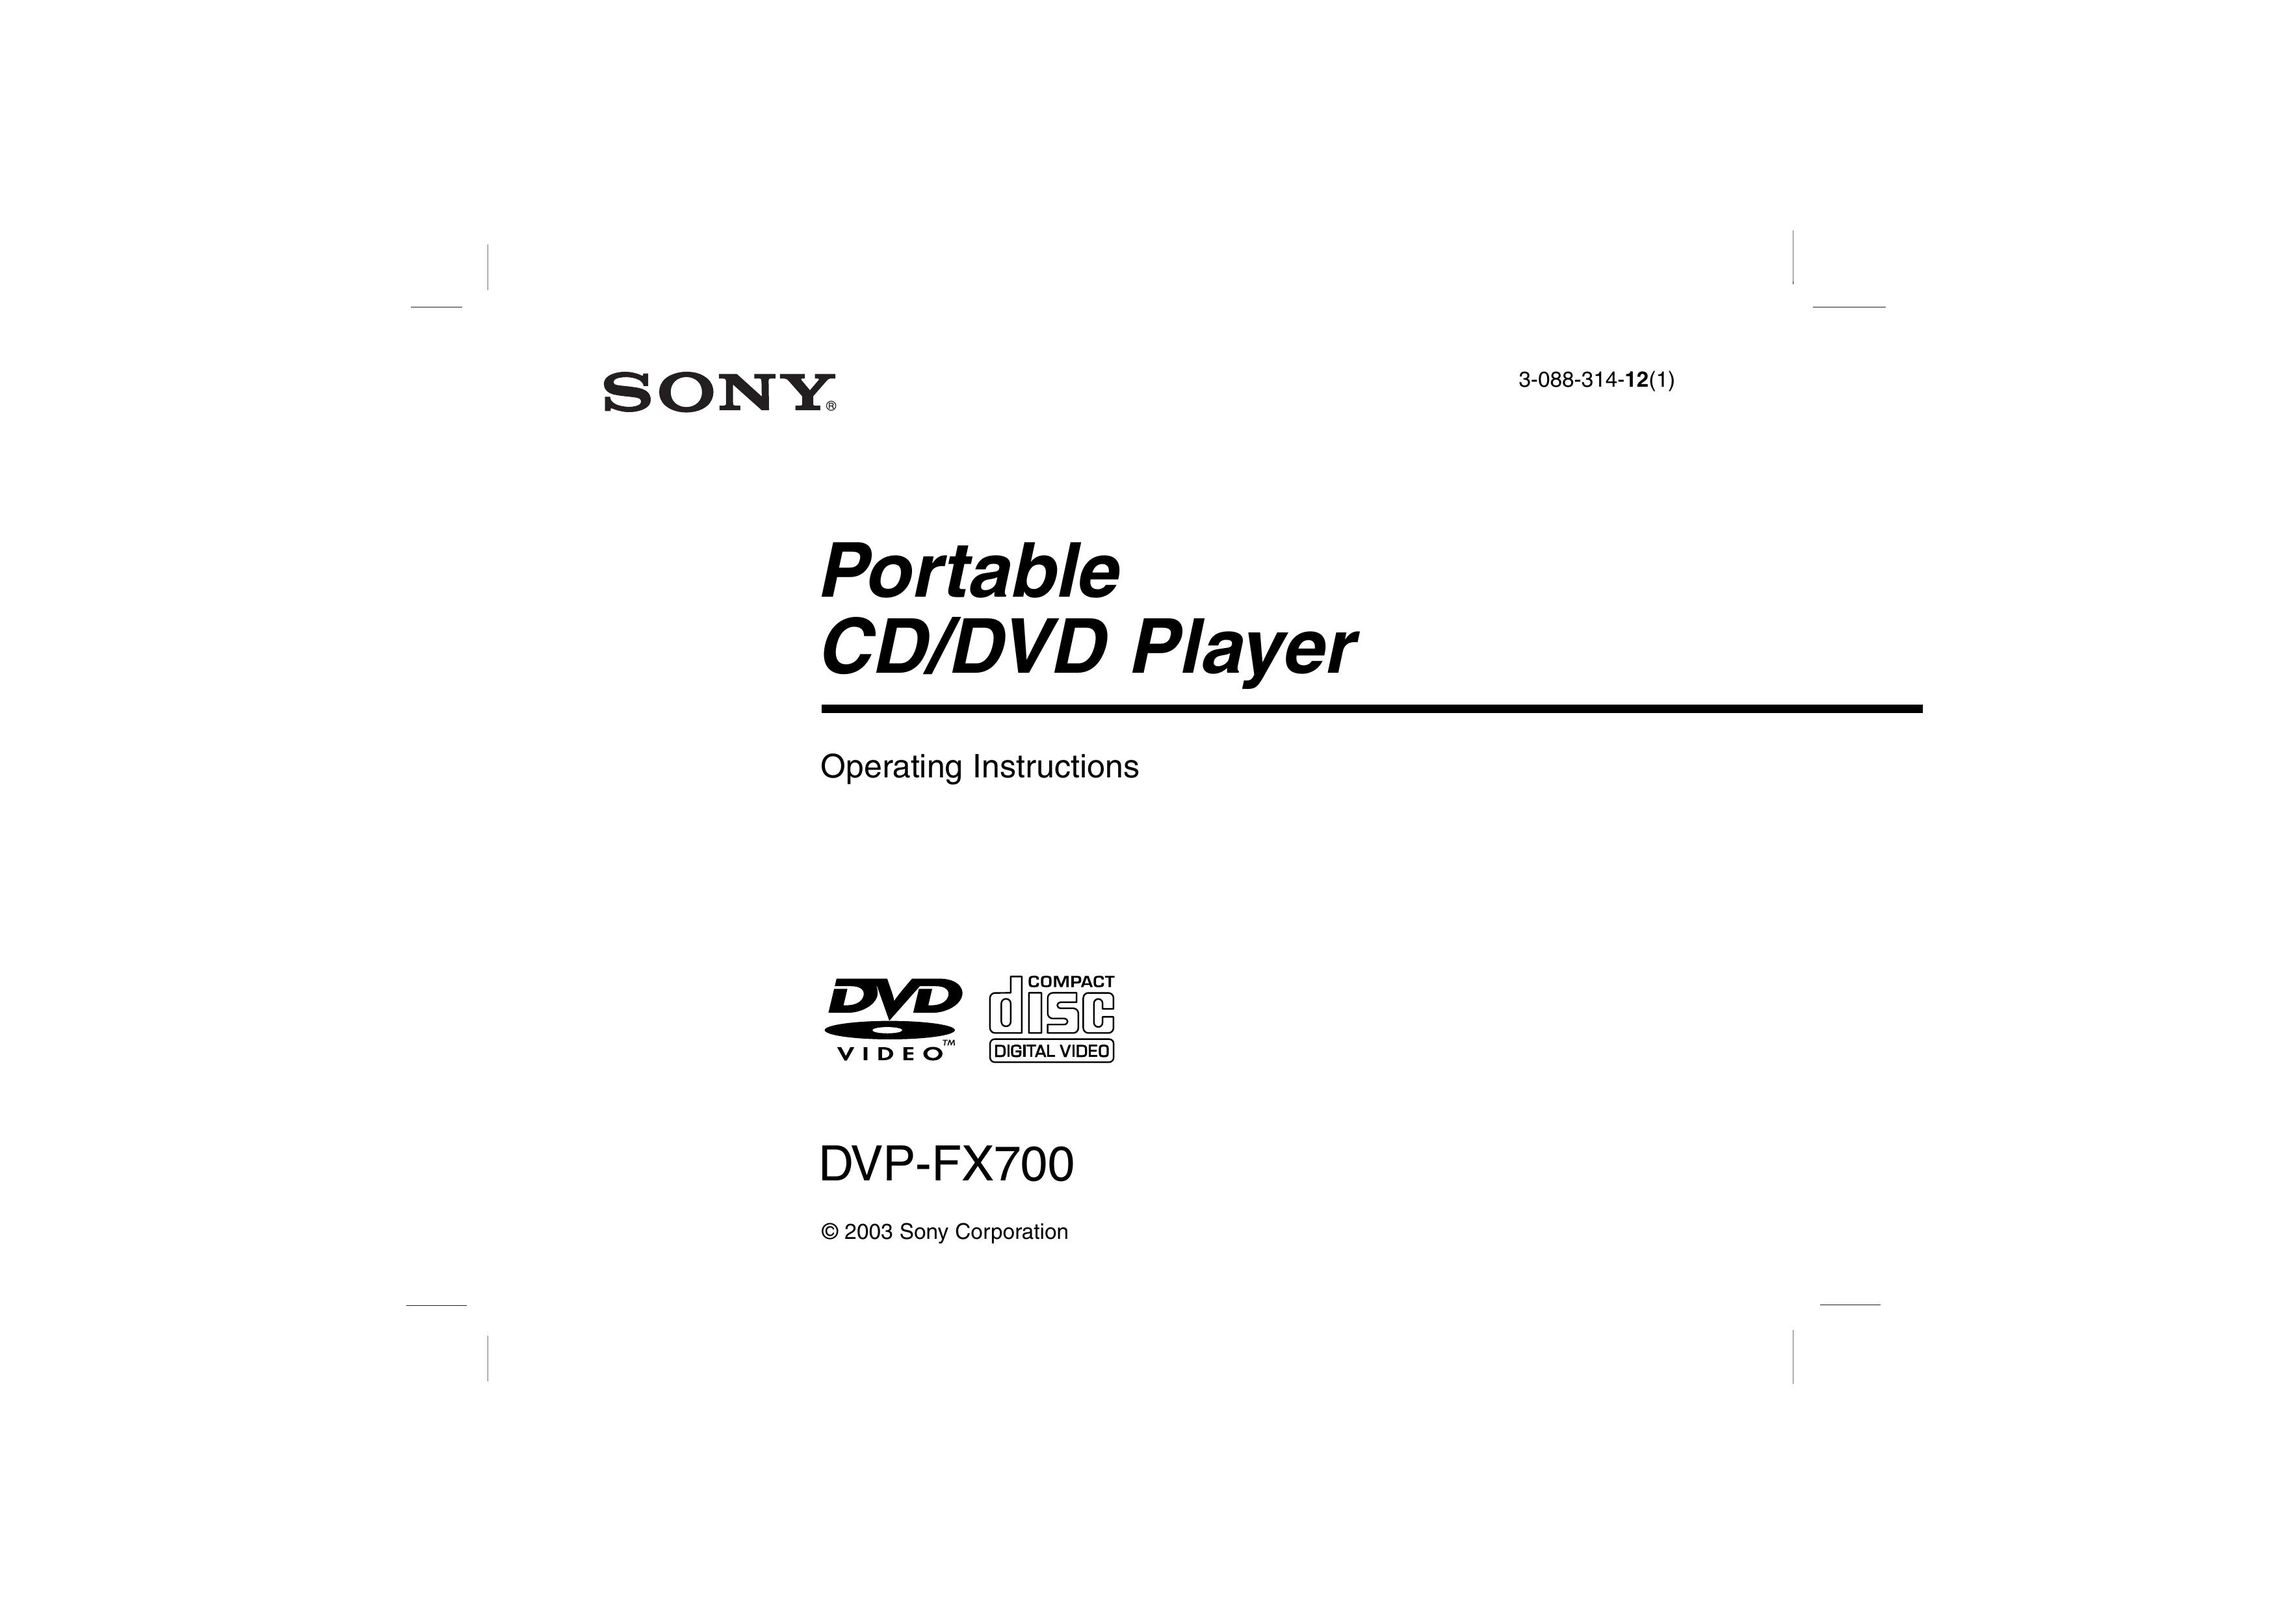 Sony DPS5032N Portable DVD Player User Manual